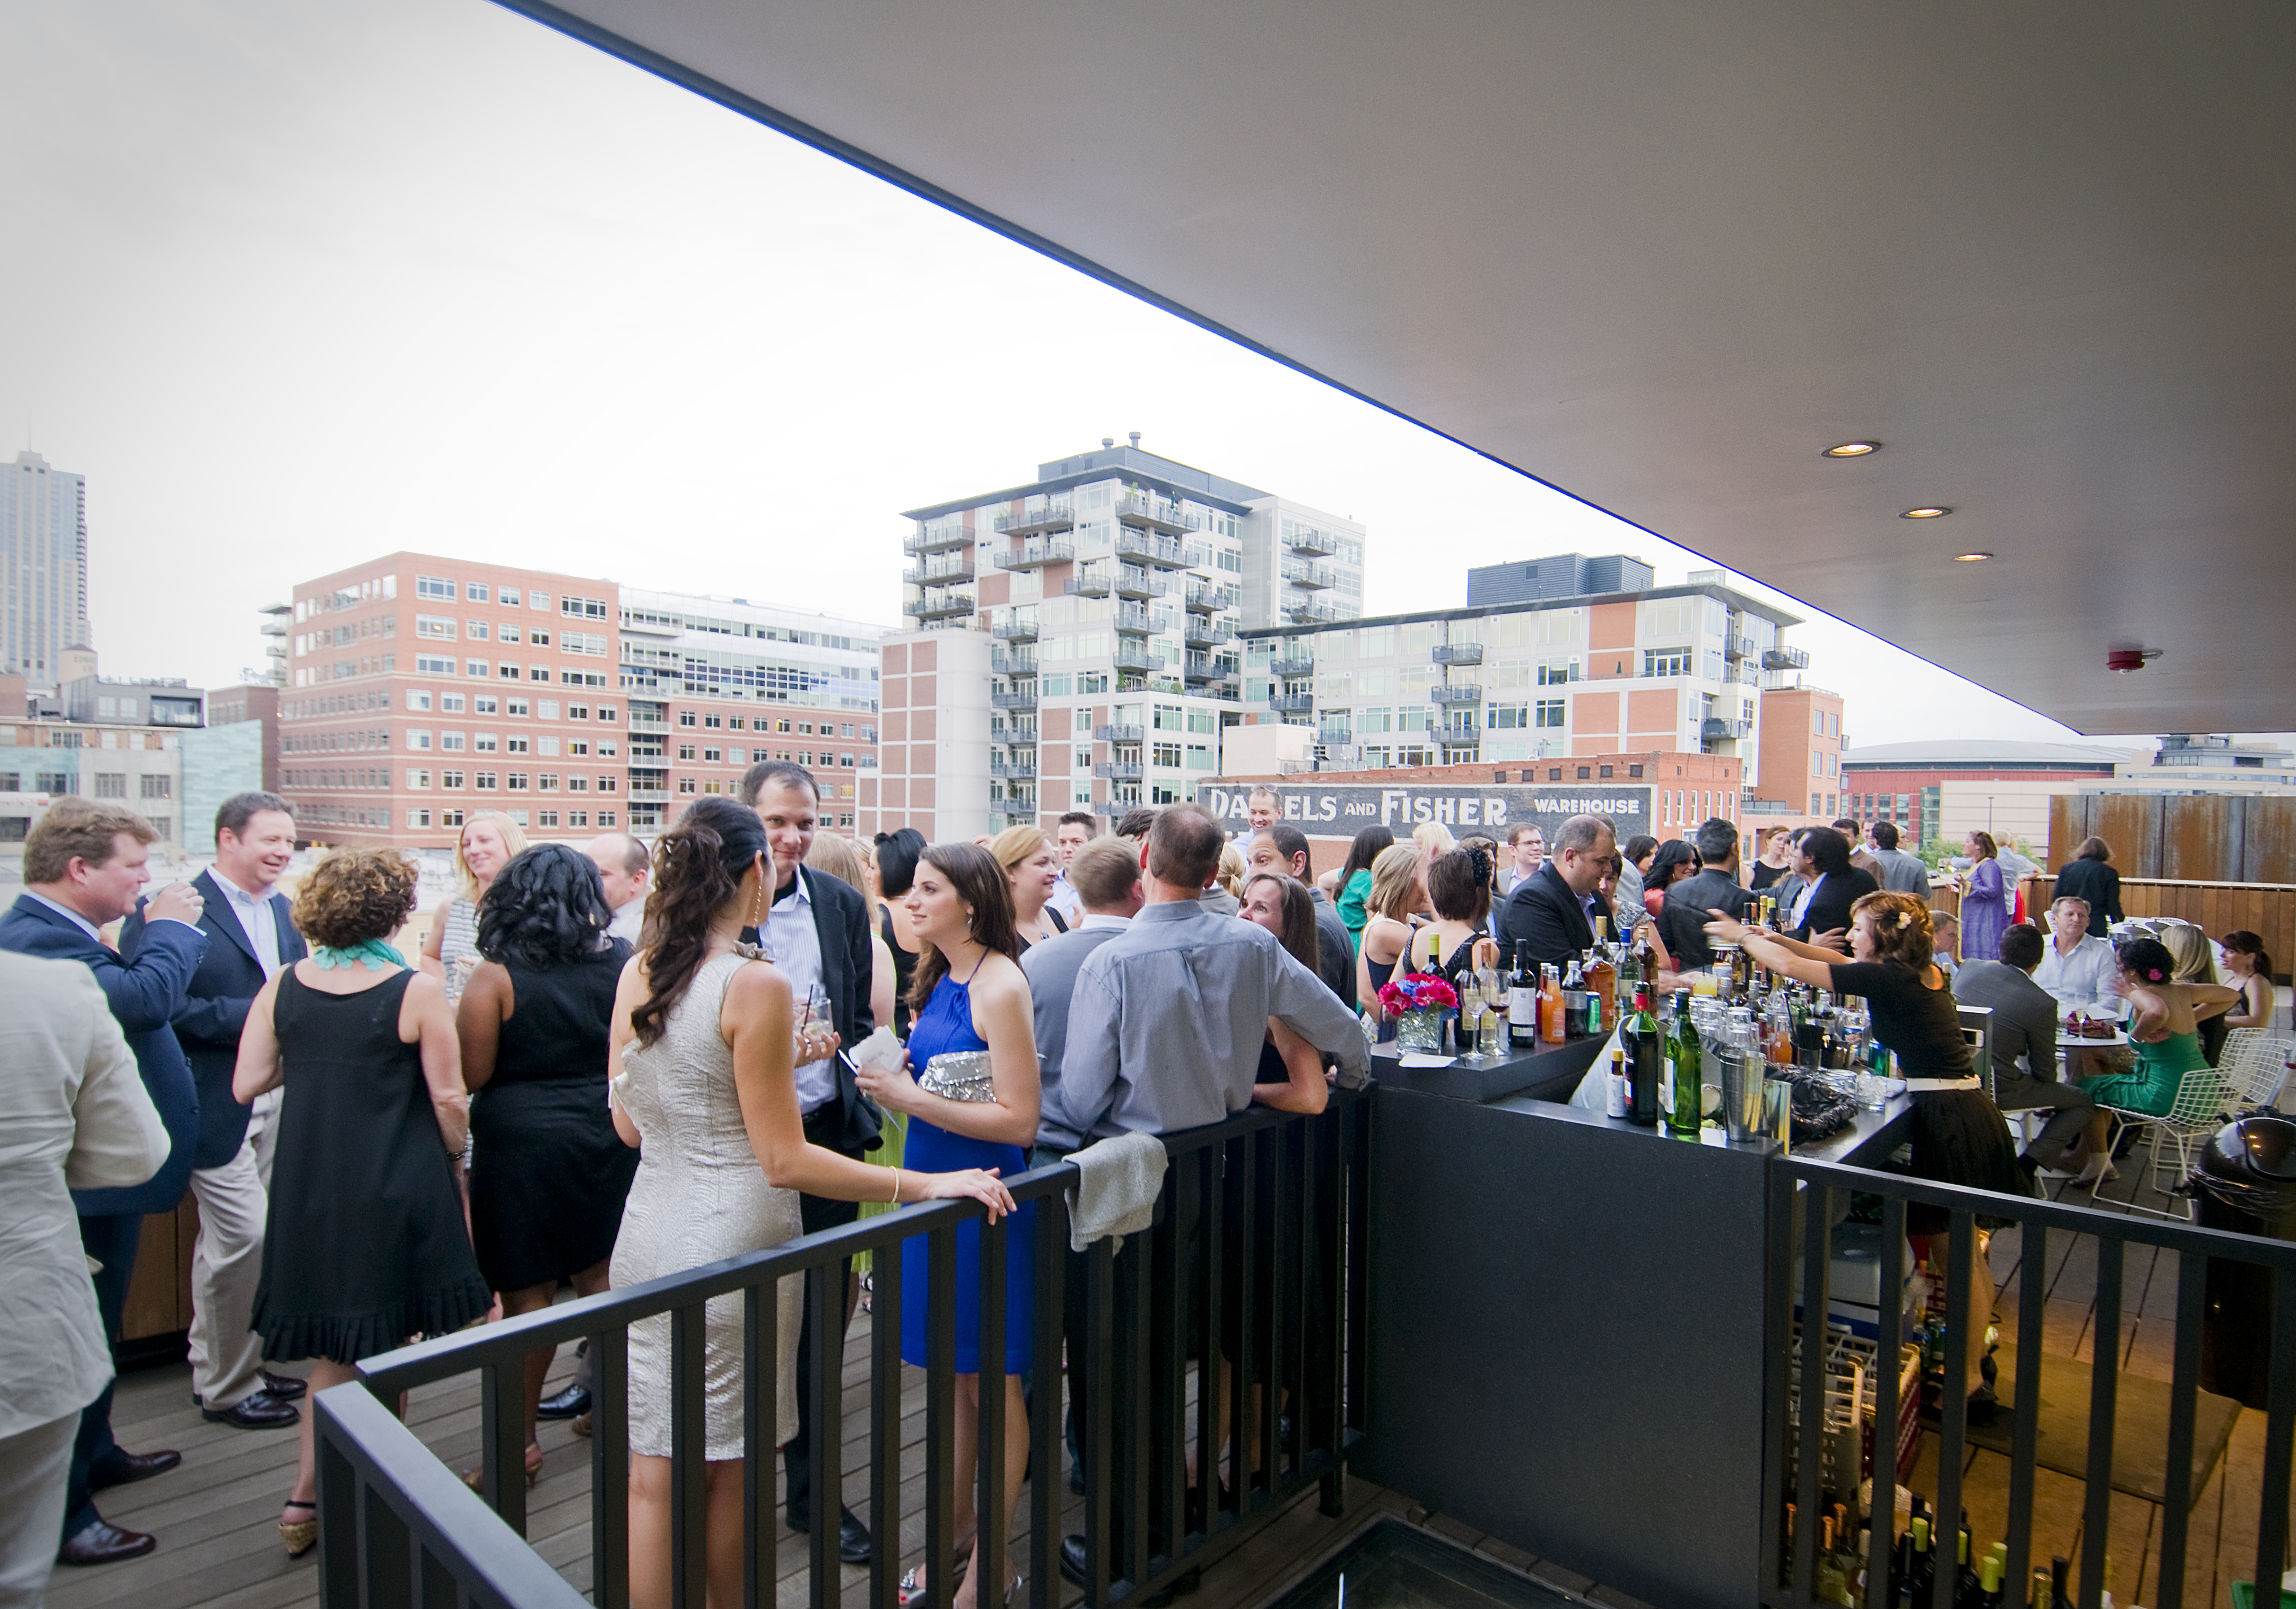 Dozens of people gather on the rooftop surrounding an outdoor bar. They are wearing dresses and suits, chatting, smiling, and enjoying beverages. 